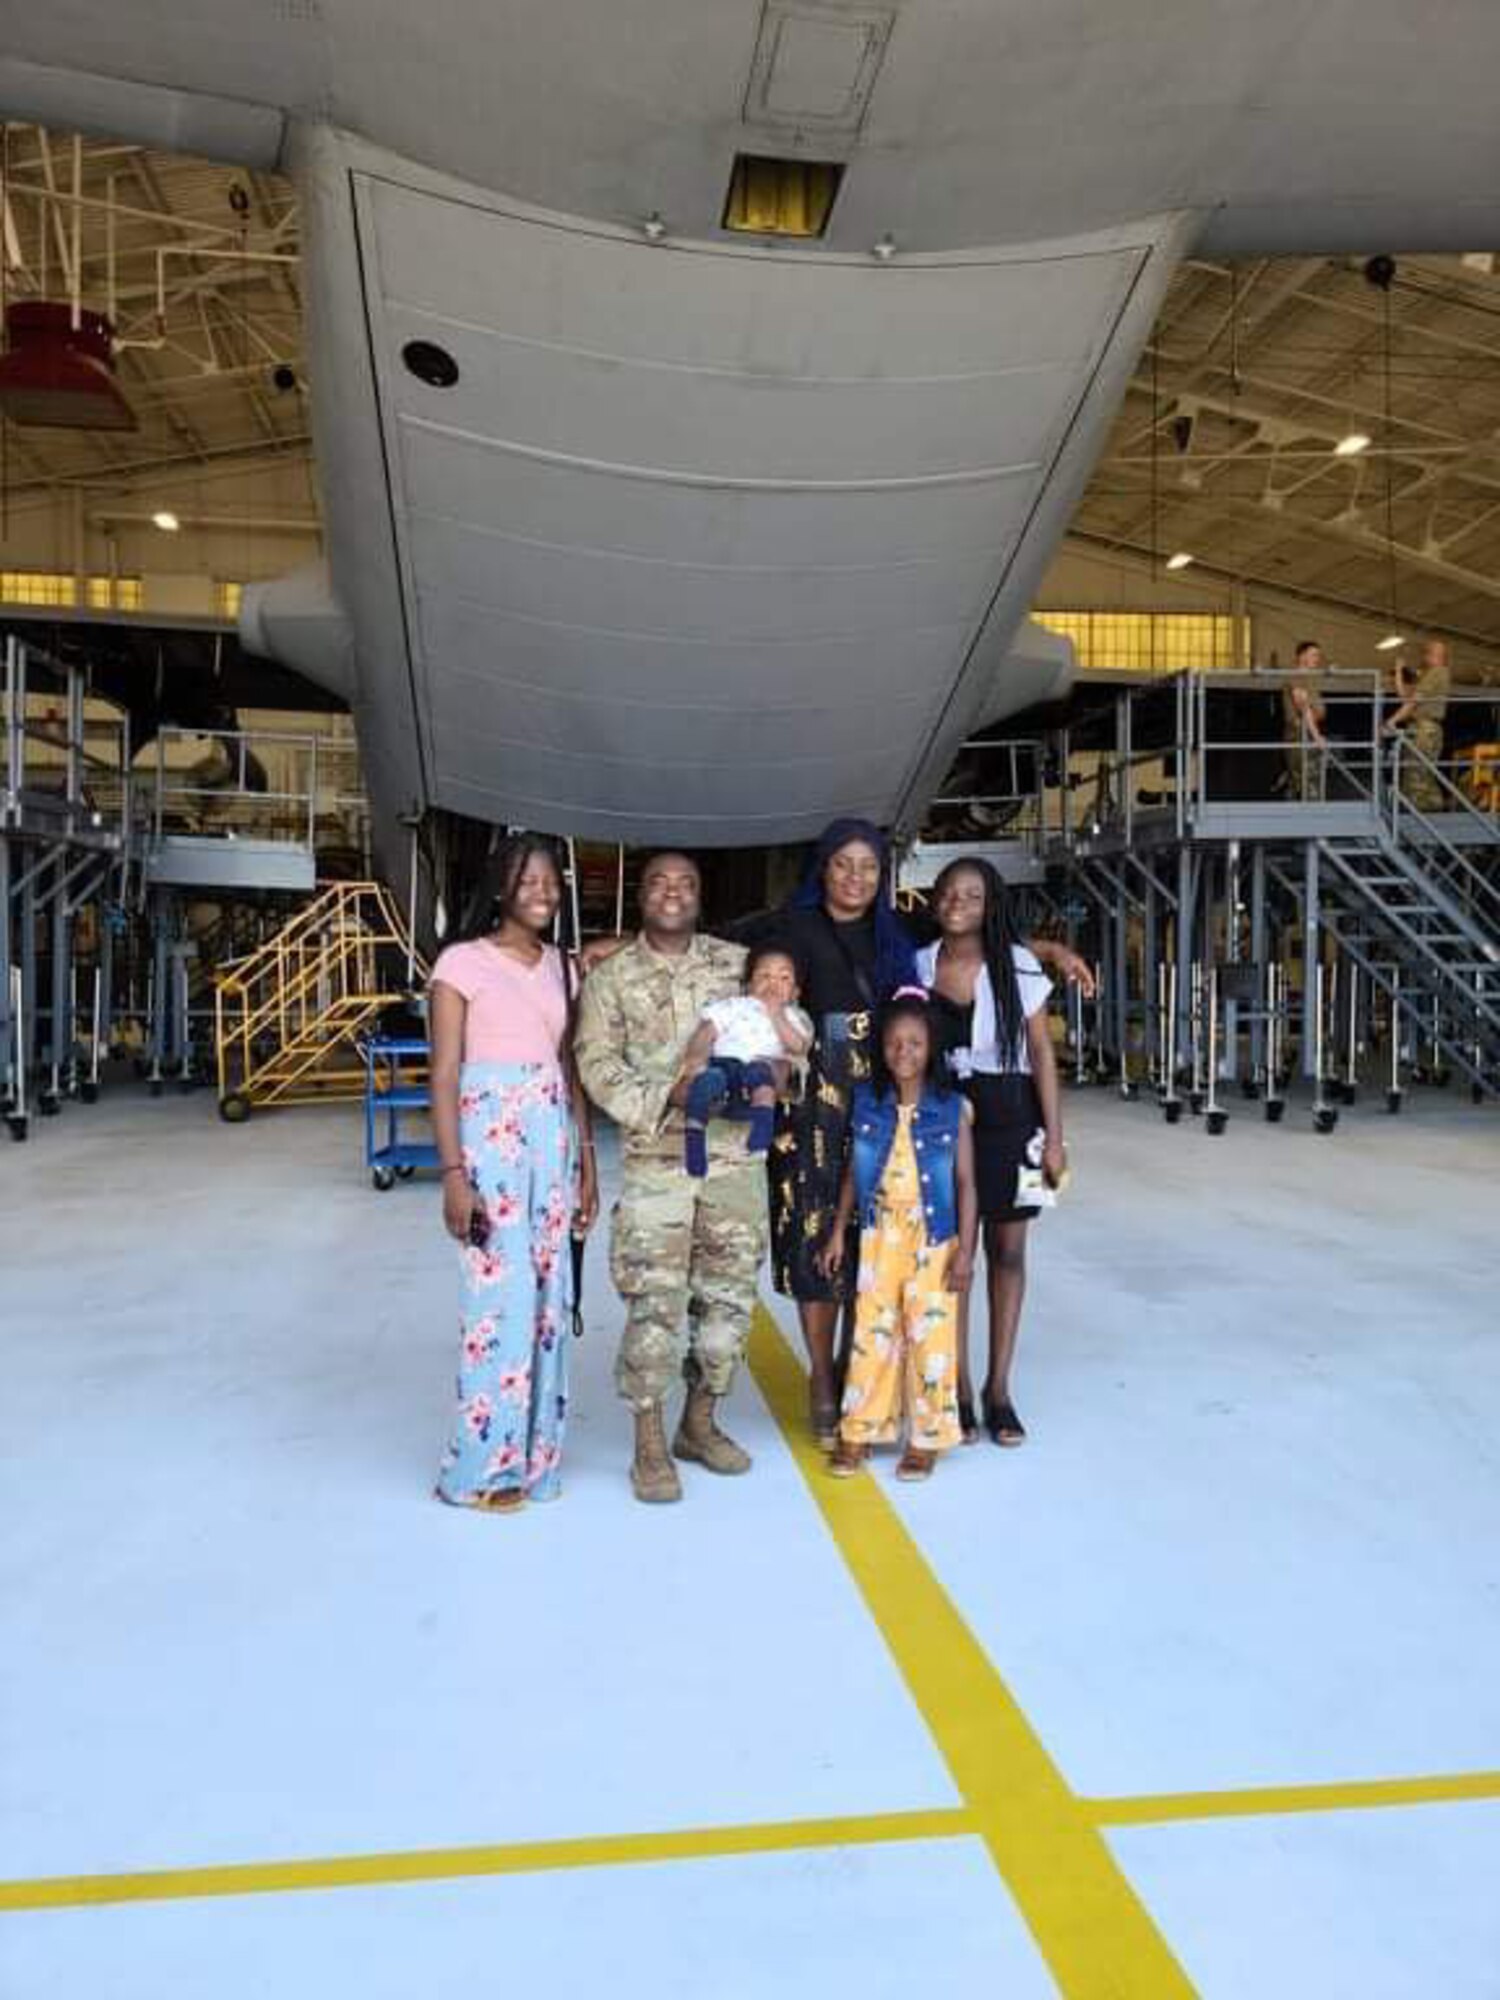 Senior Airman Ajay Vogar, 379th Expeditionary Maintenance Squadron commander support staff security manager, now deployed member at Al Udeid Air Base, Qatar, poses for a photo with his family inside of an aircraft maintenance hangar.